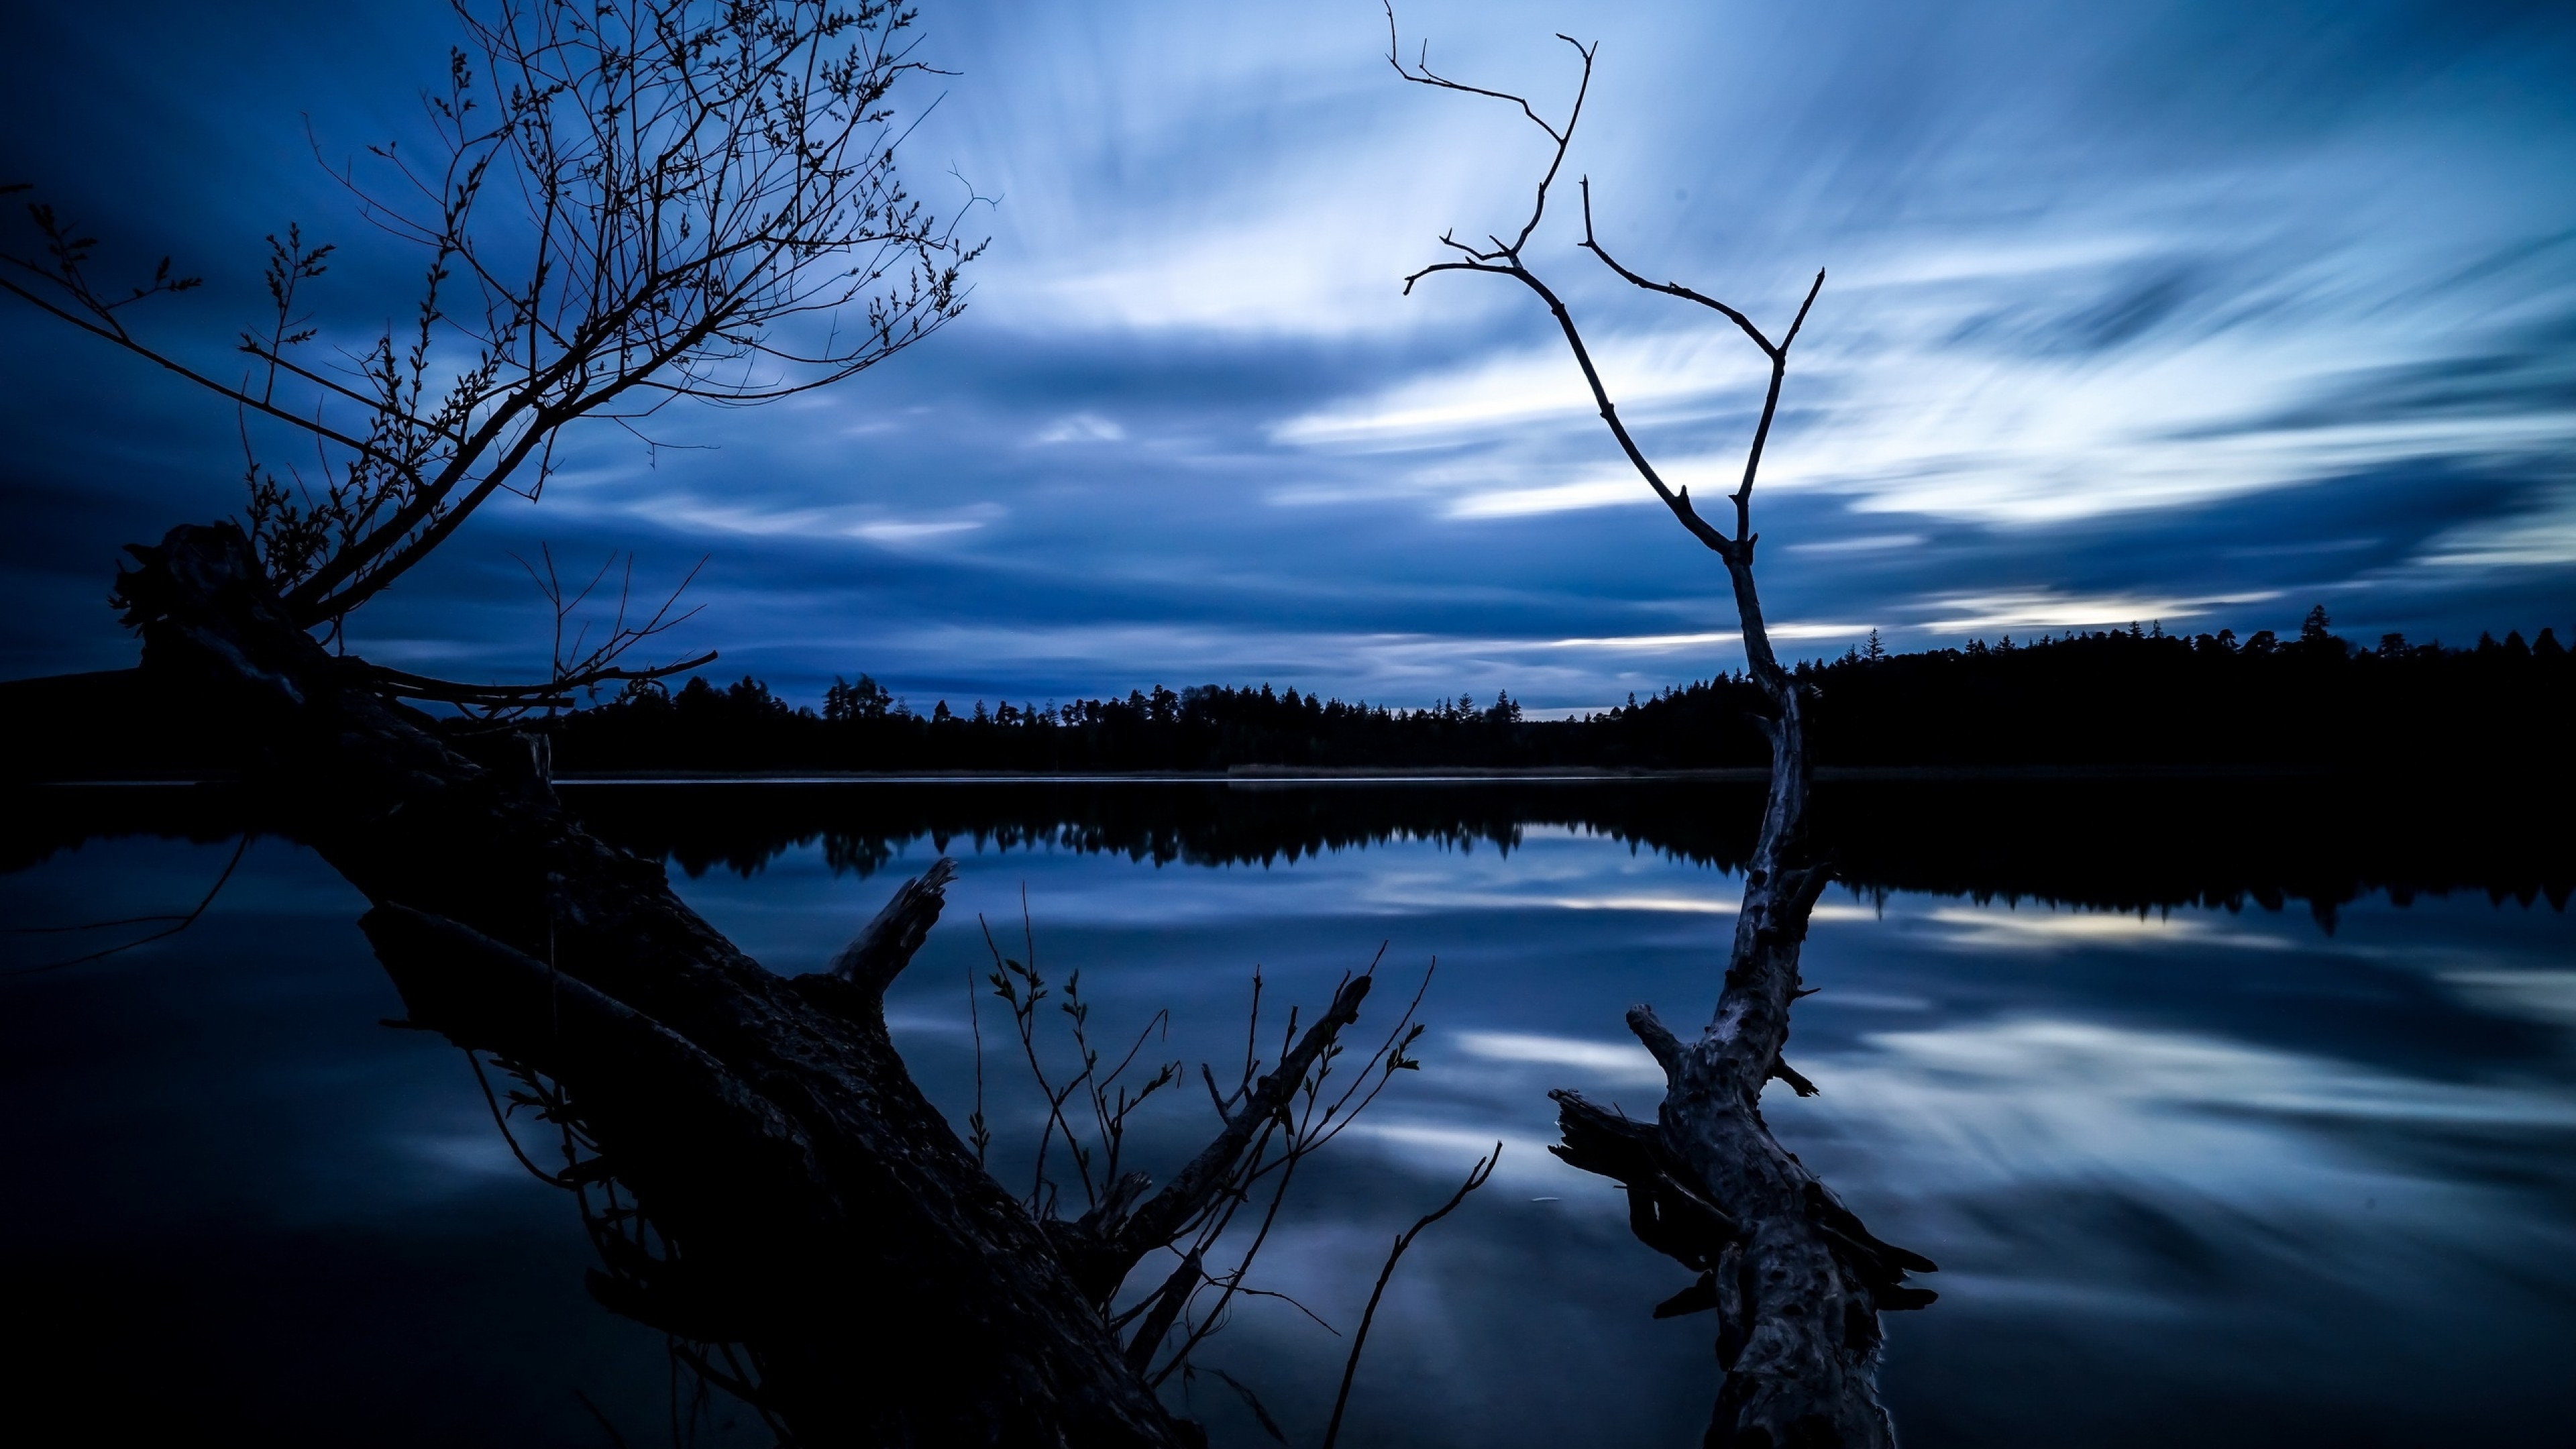 Dry tree by the lake under a beautiful night sky wallpapers and images